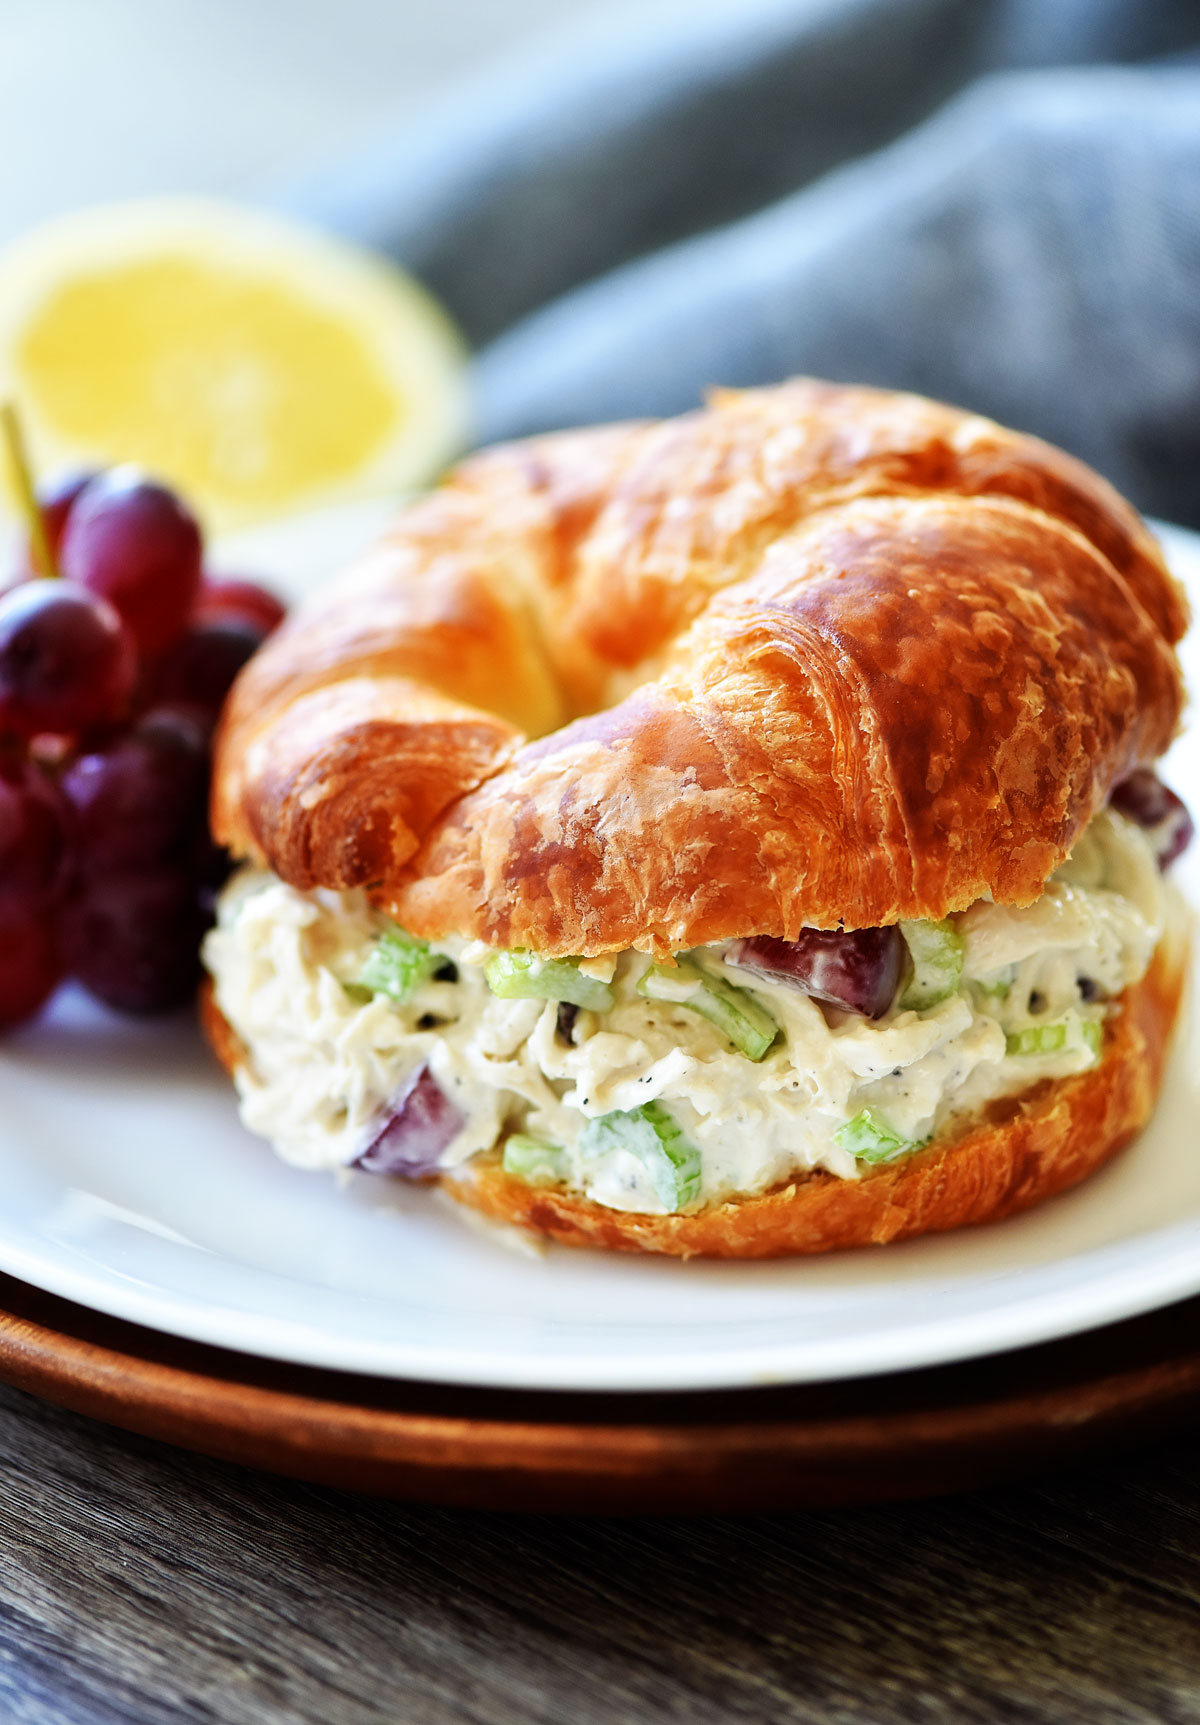 Chicken Salad Croissant Sandwiches are filled with flavorful chicken salad stuffed between buttery, soft croissant rolls. Life-in-the-Lofthouse.com